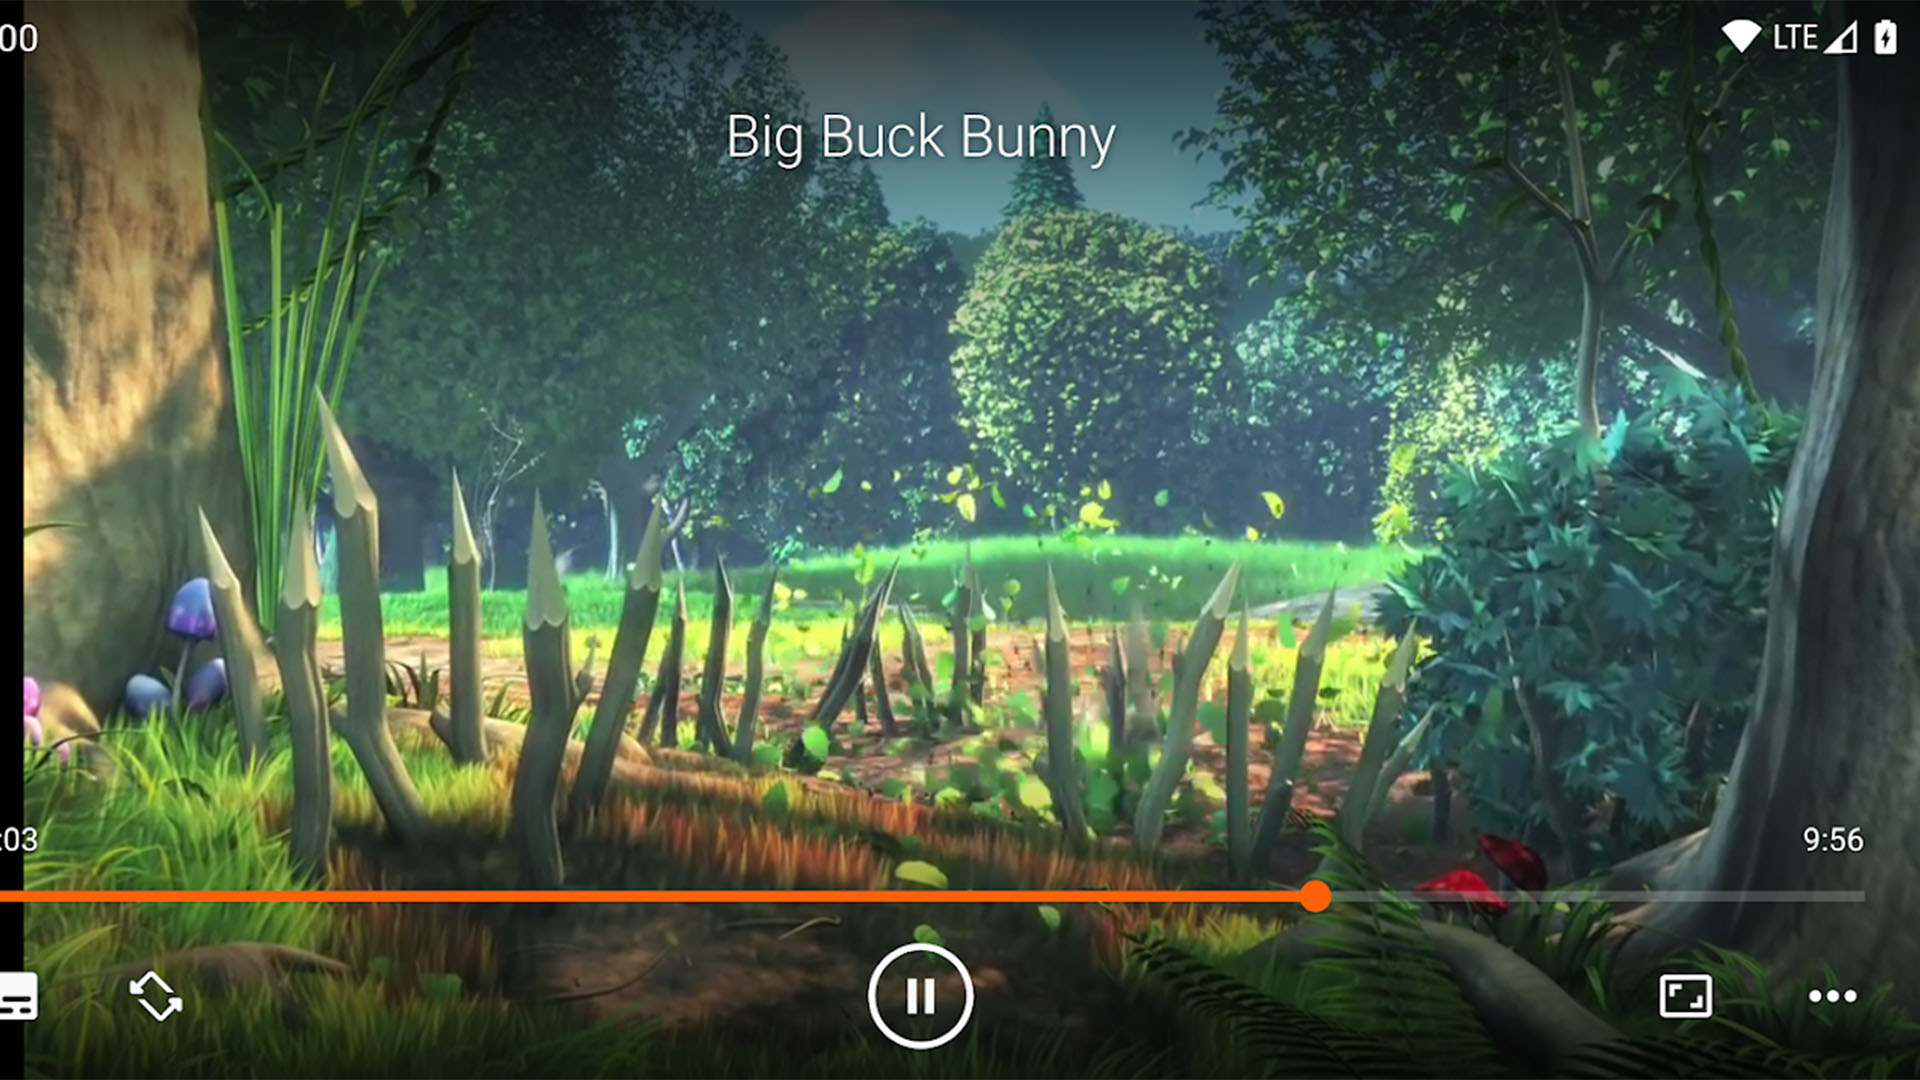 VLC for Android screenshot 2022